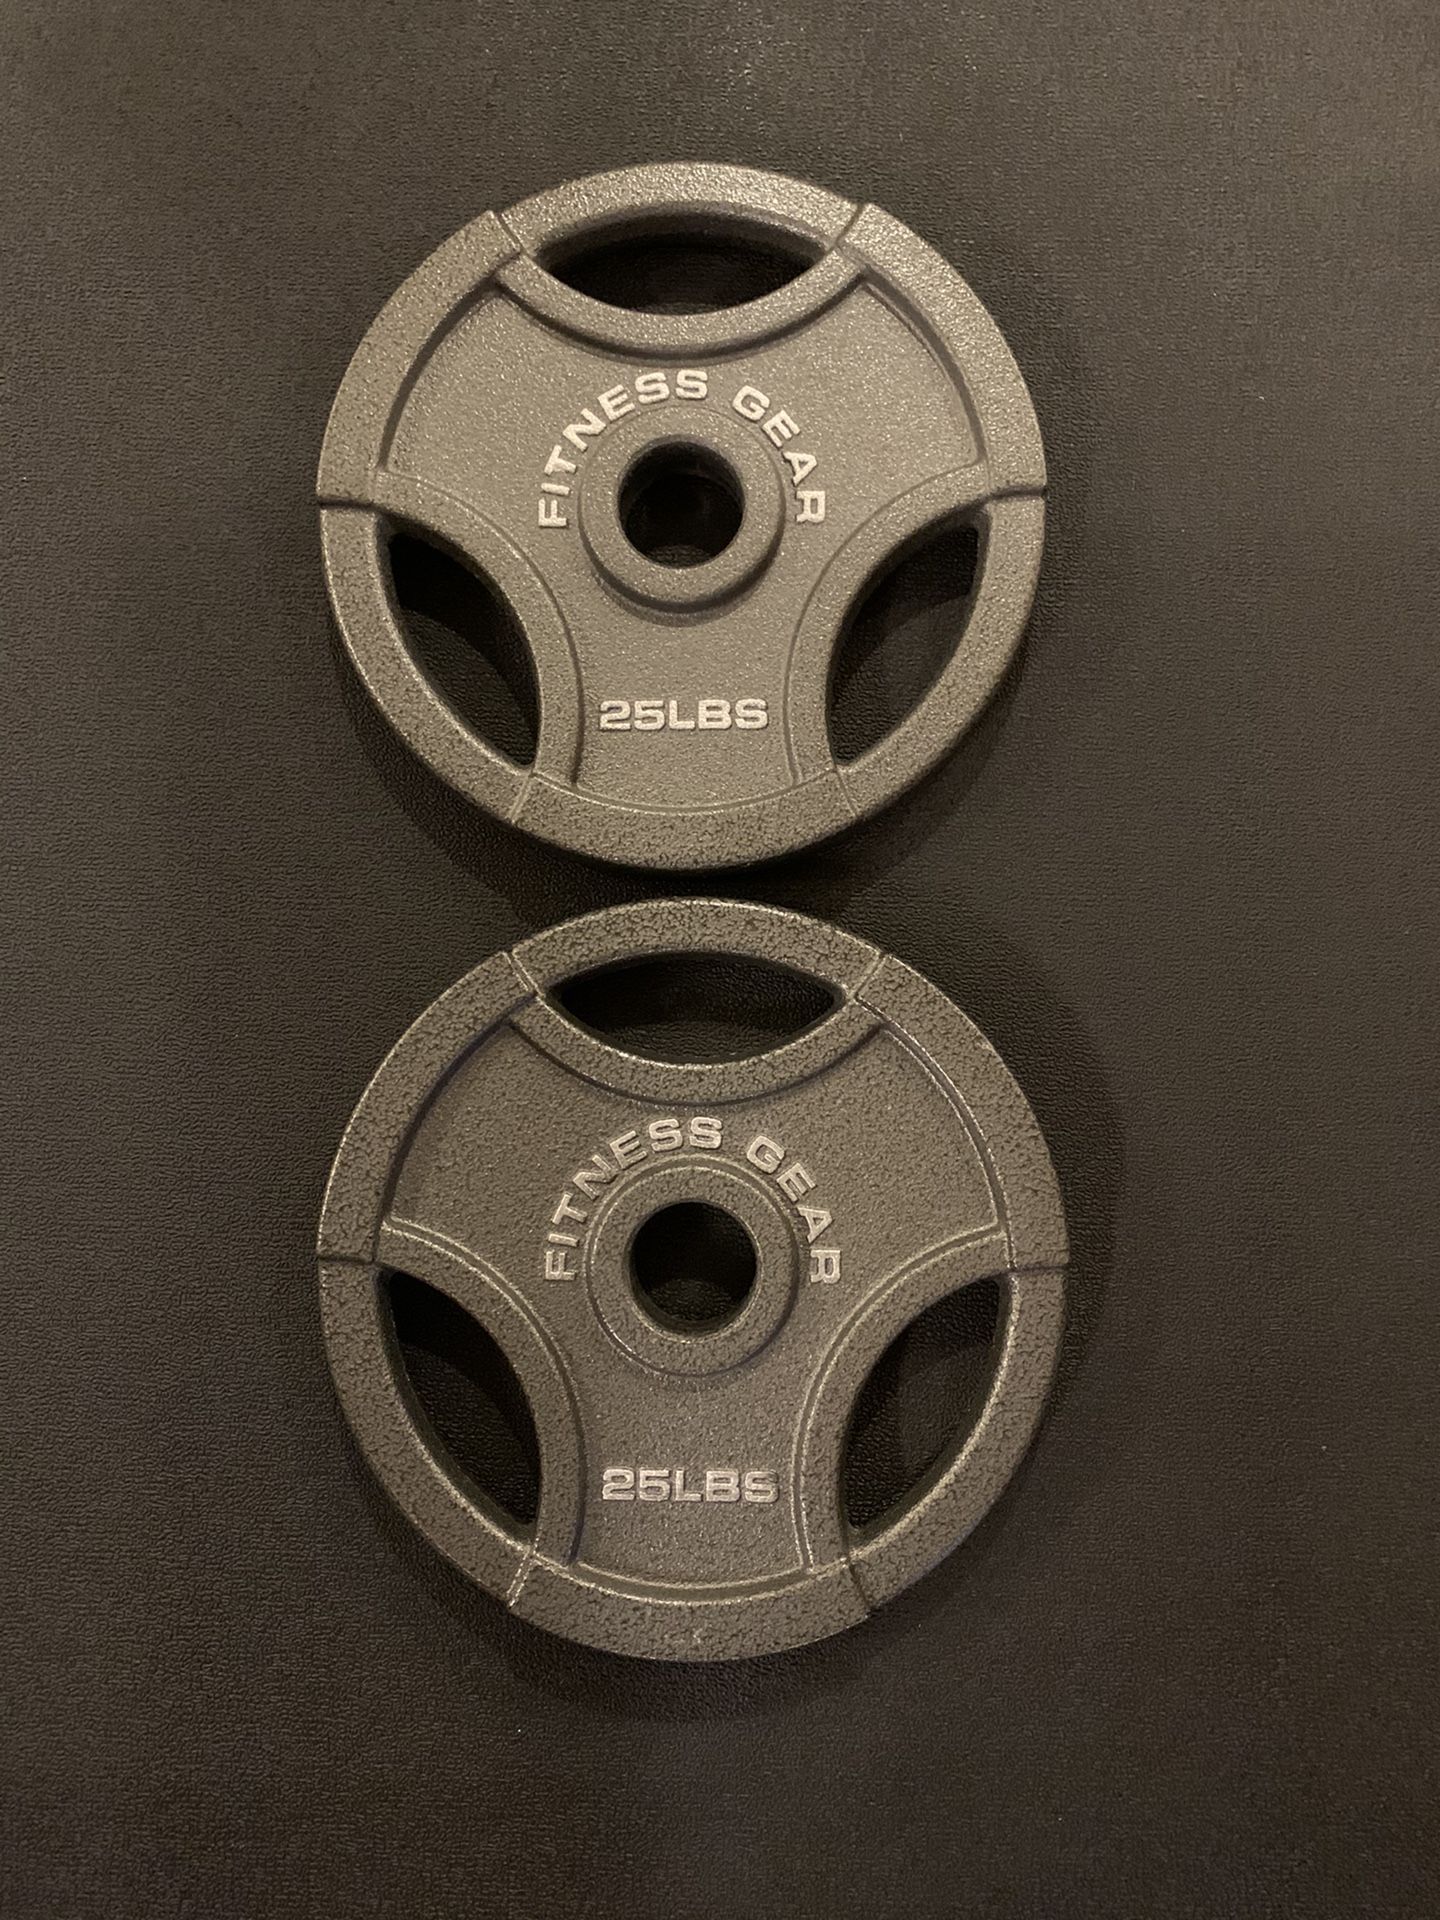 25 lbs Fitness Gear Olympic Weight Plates.